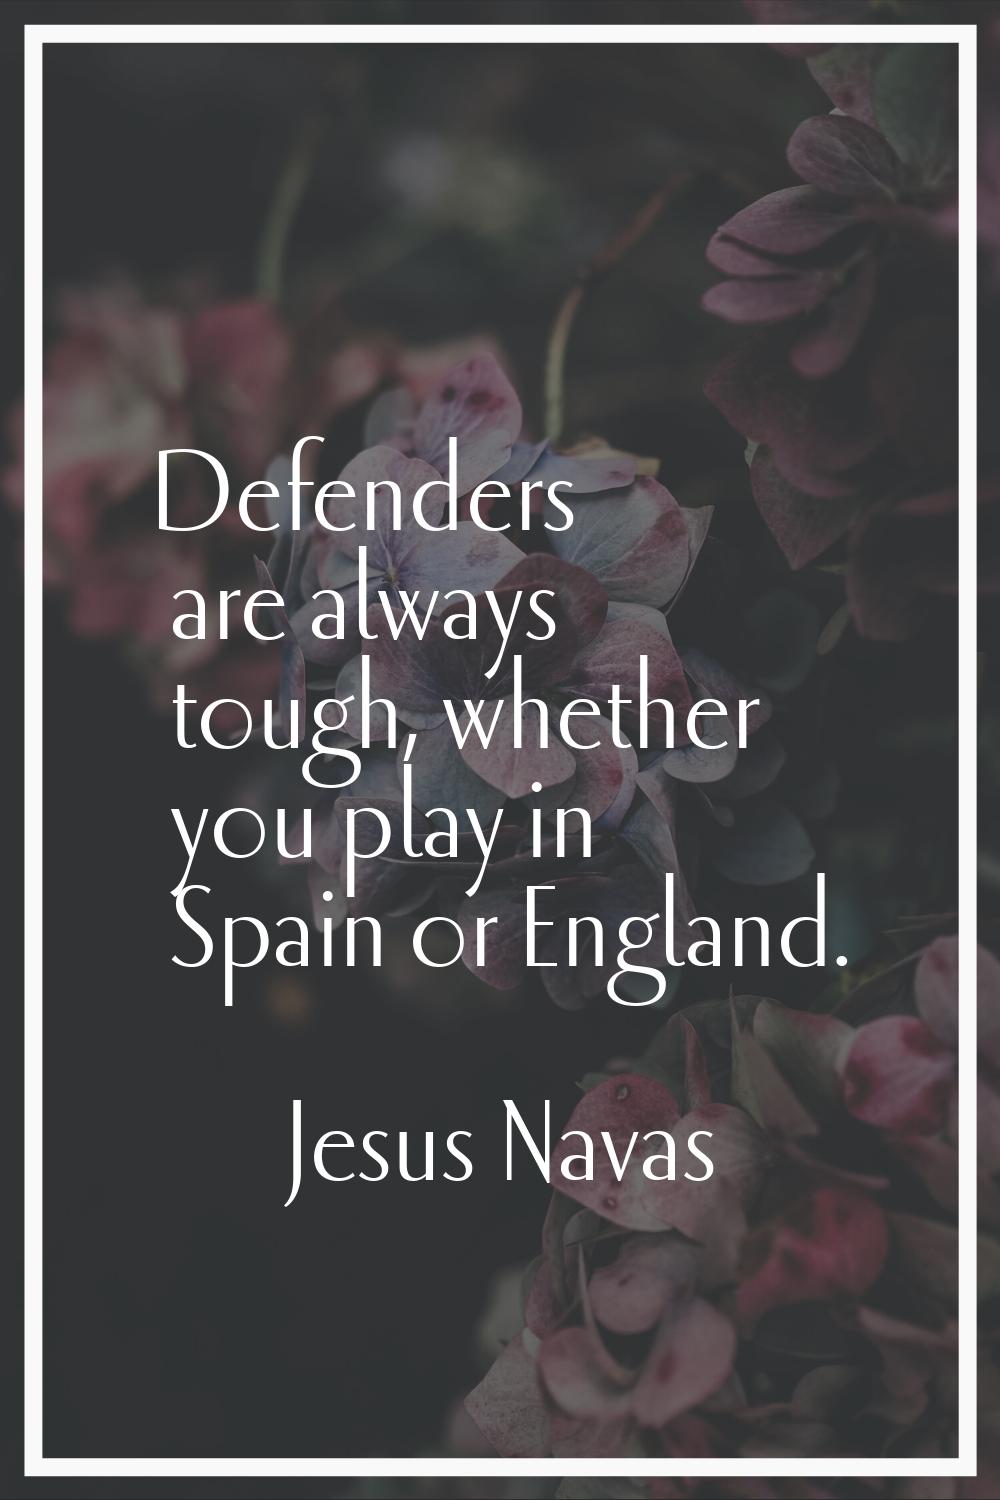 Defenders are always tough, whether you play in Spain or England.